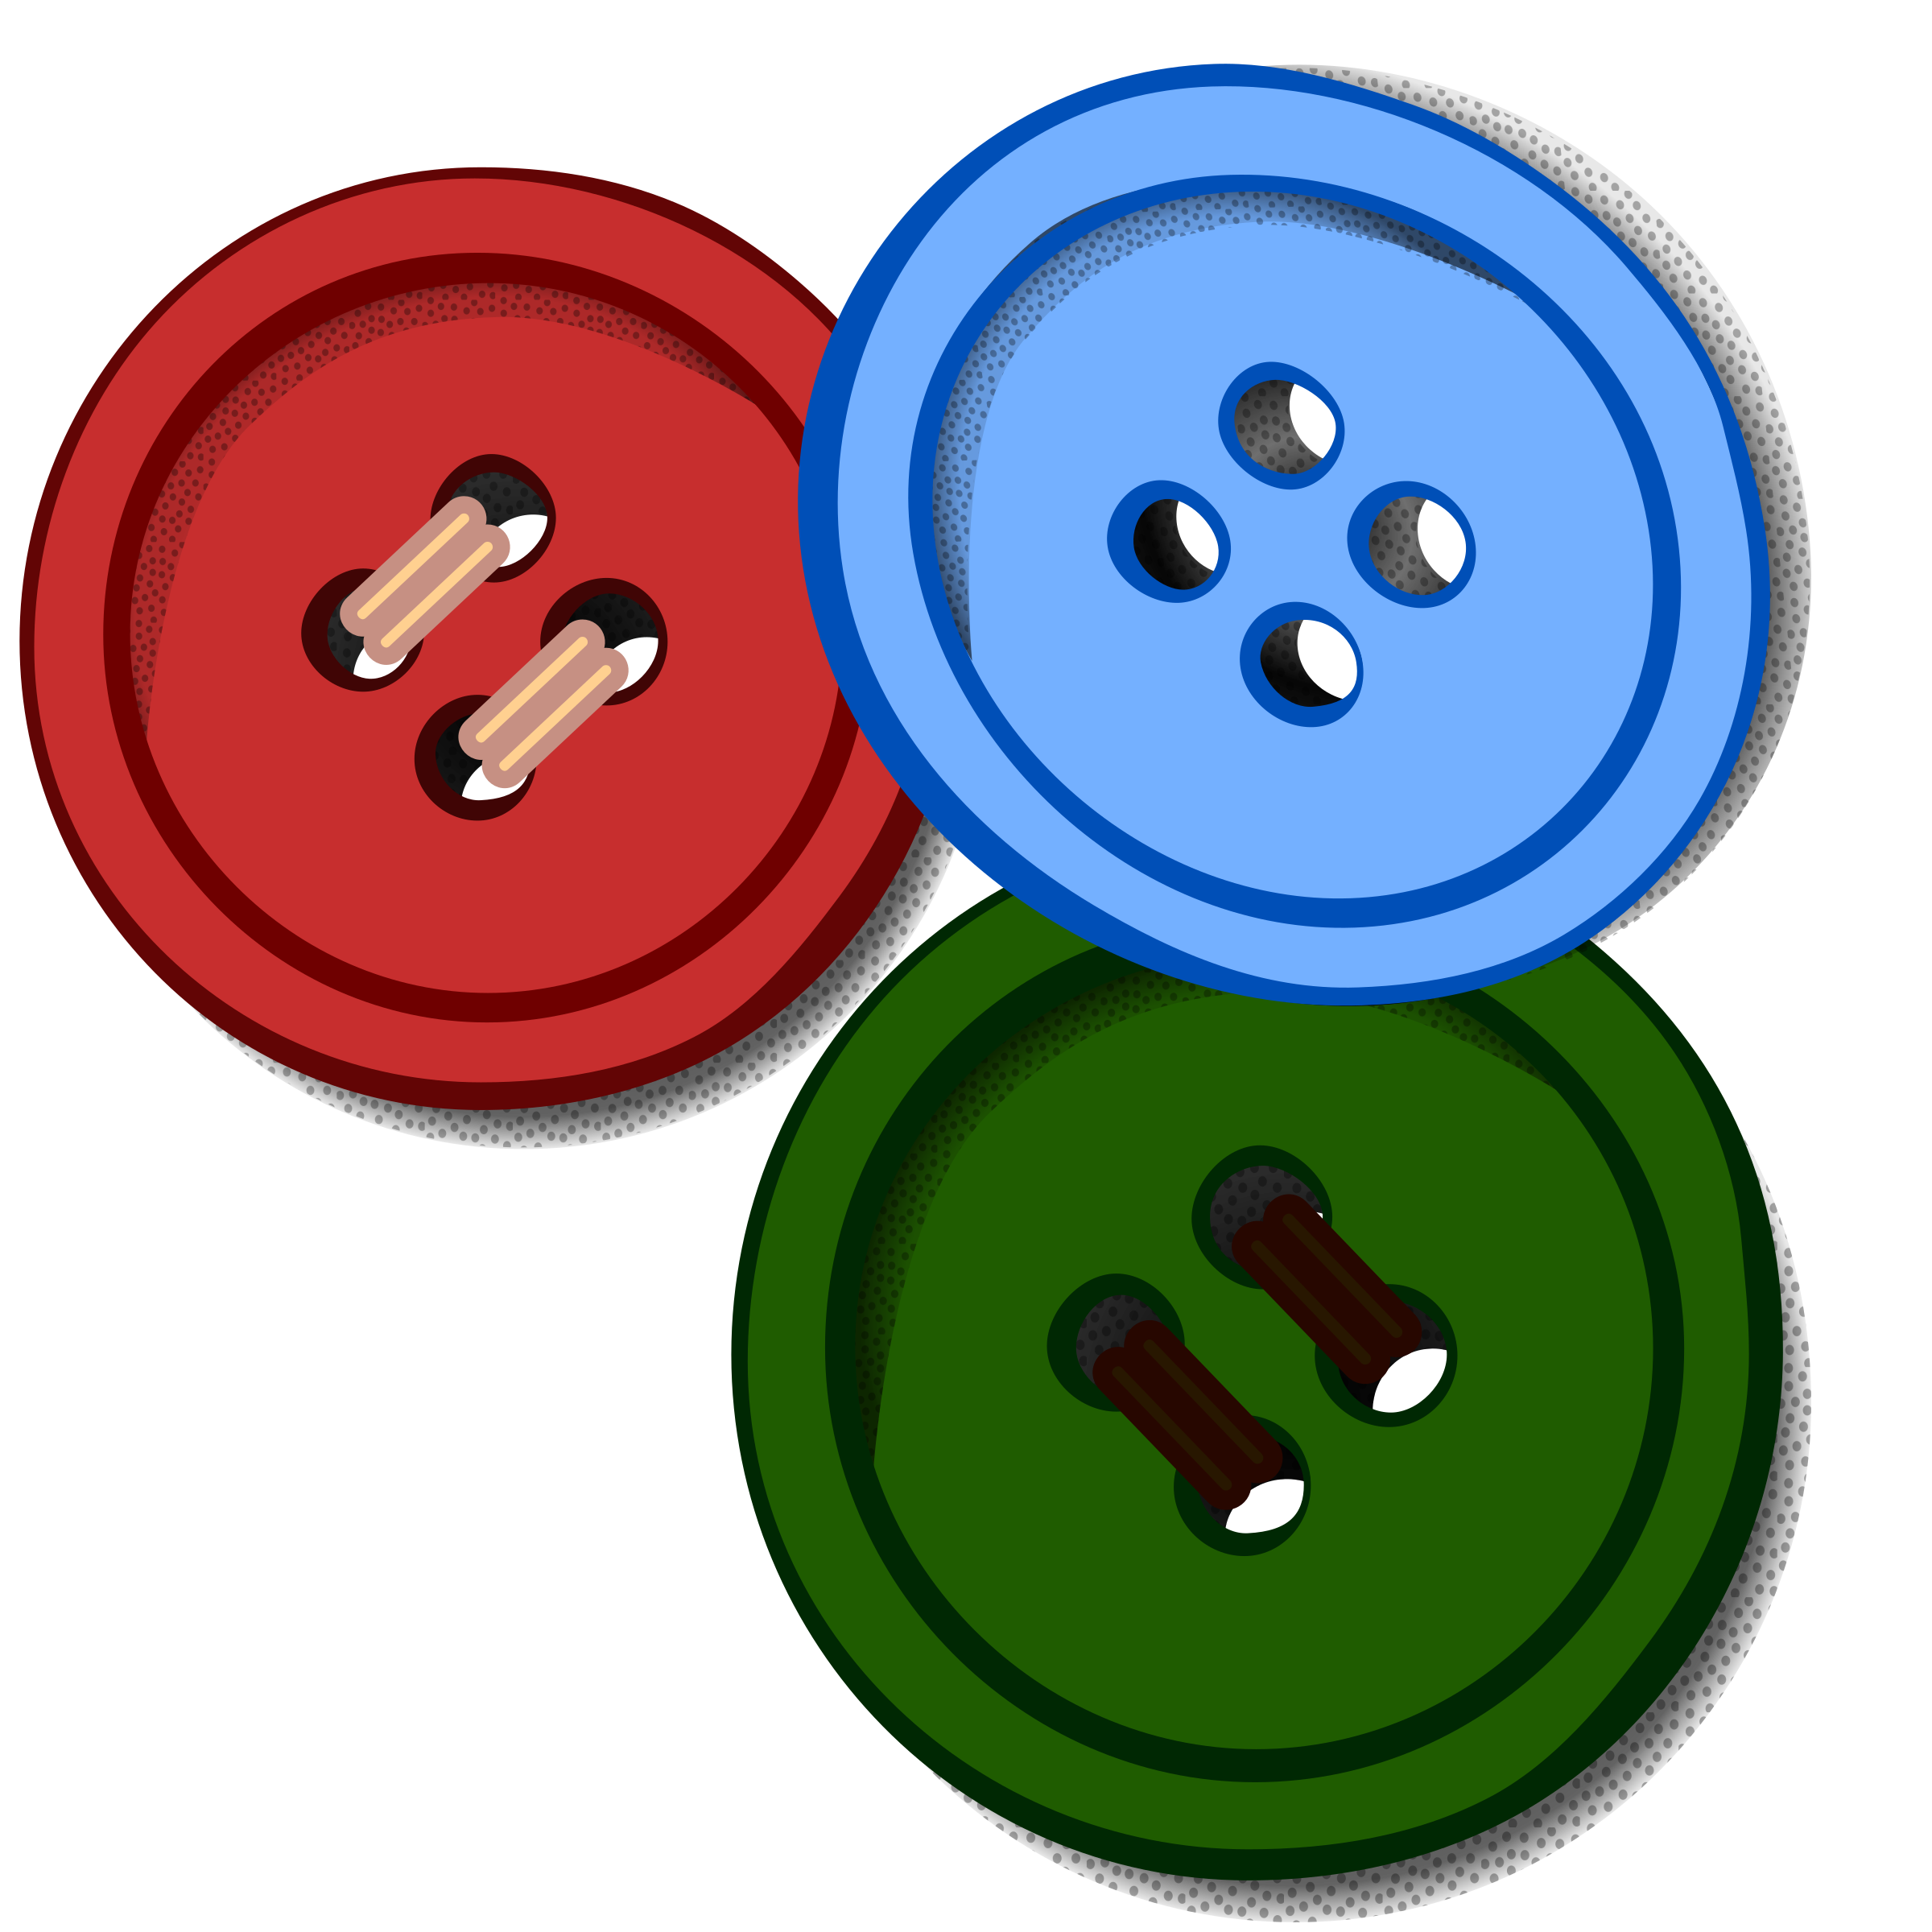 Colored Buttons vector files image - Free stock photo - Public Domain